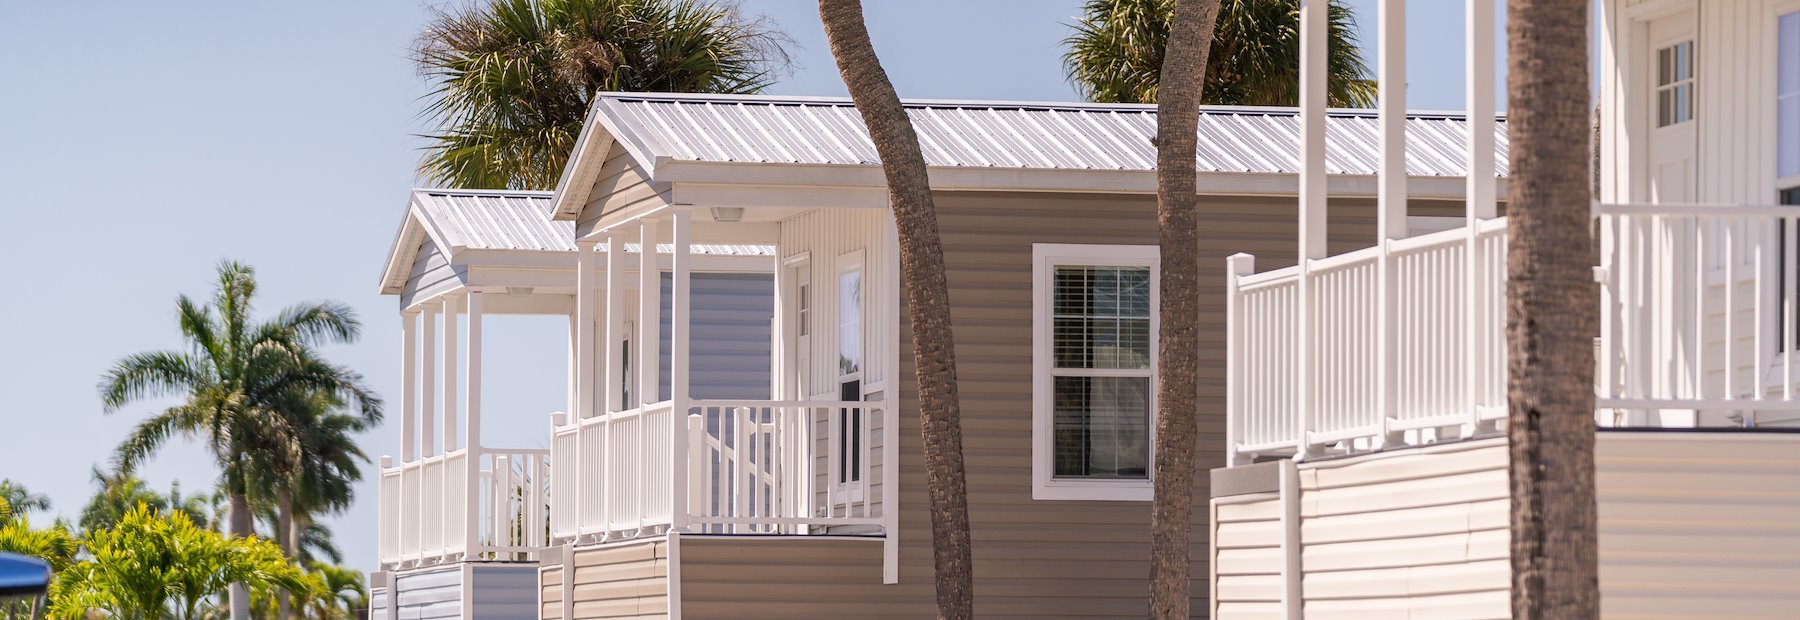 Vacation Home Sales - Sun Retreats Fort Myers Beach